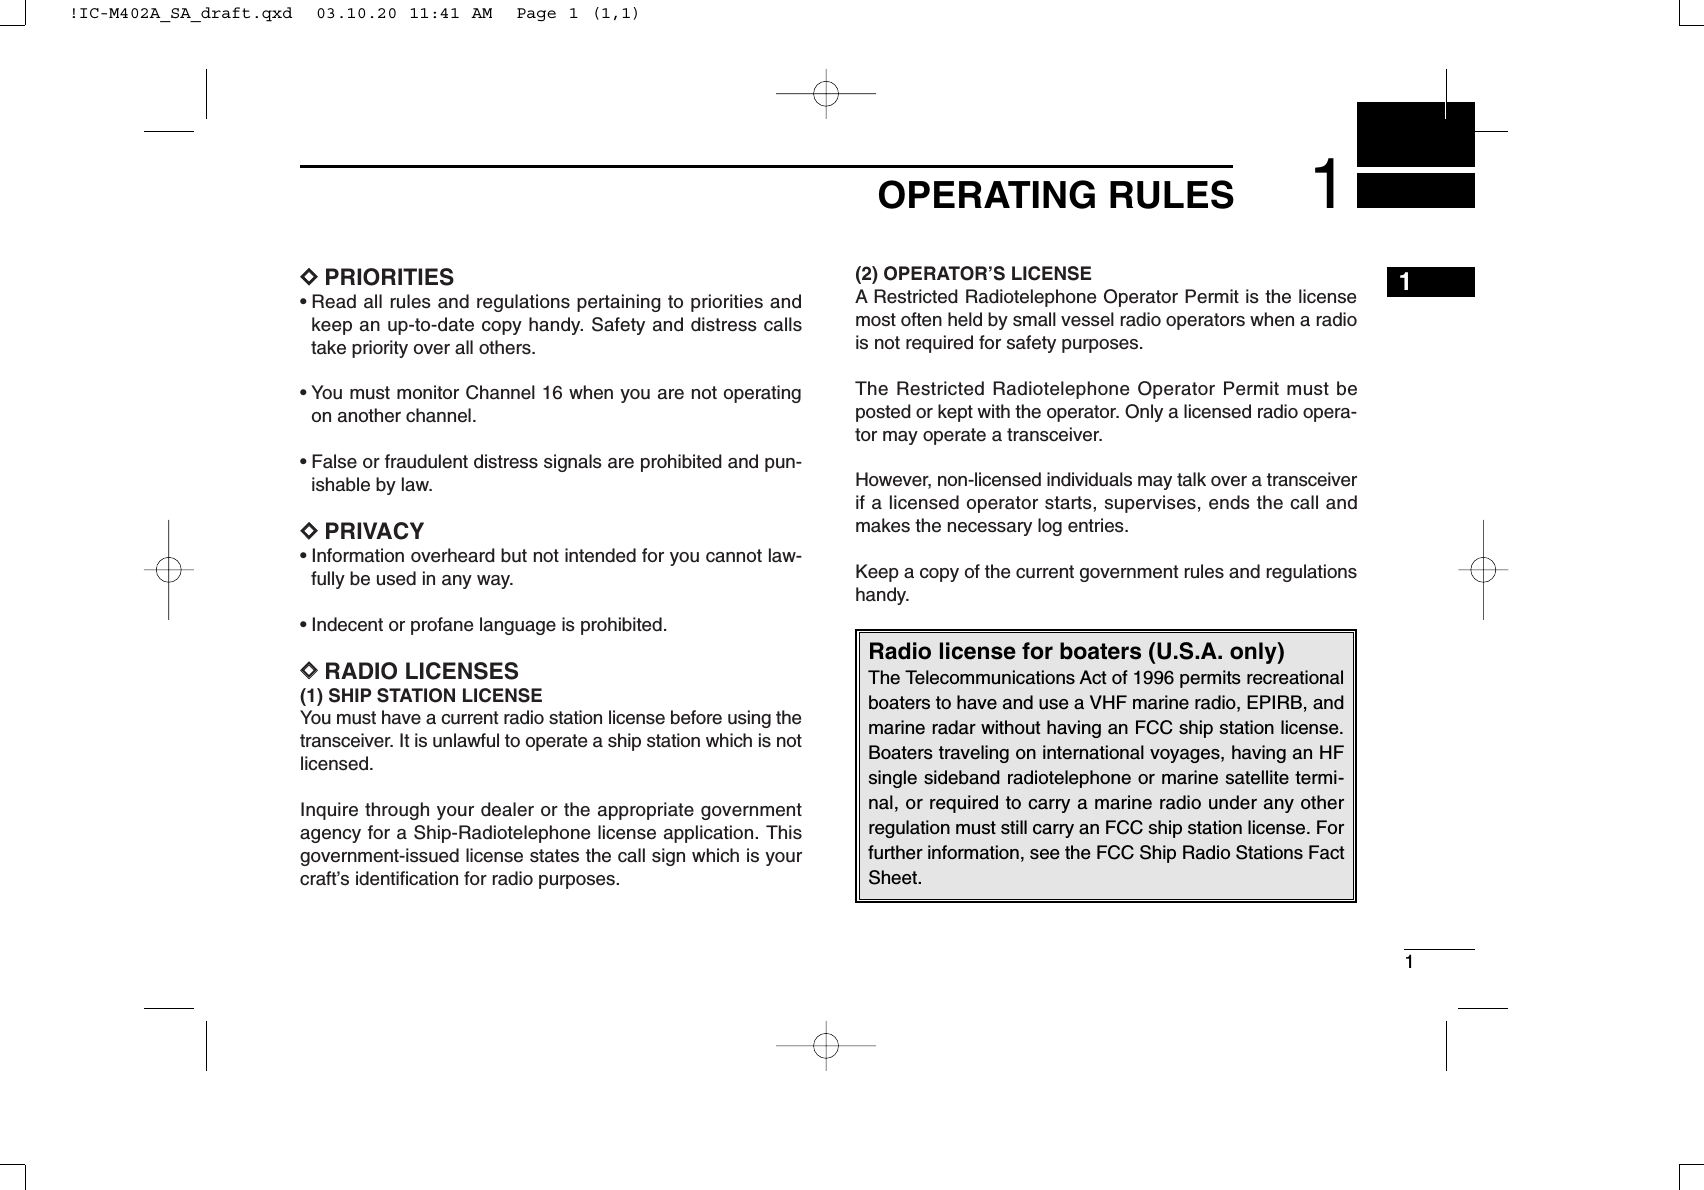 11OPERATING RULESDDPRIORITIES• Read all rules and regulations pertaining to priorities andkeep an up-to-date copy handy. Safety and distress callstake priority over all others.• You must monitor Channel 16 when you are not operatingon another channel.• False or fraudulent distress signals are prohibited and pun-ishable by law.DDPRIVACY• Information overheard but not intended for you cannot law-fully be used in any way.• Indecent or profane language is prohibited.DDRADIO LICENSES(1) SHIP STATION LICENSEYou must have a current radio station license before using thetransceiver. It is unlawful to operate a ship station which is notlicensed.Inquire through your dealer or the appropriate governmentagency for a Ship-Radiotelephone license application. Thisgovernment-issued license states the call sign which is yourcraft’s identiﬁcation for radio purposes.(2) OPERATOR’S LICENSEA Restricted Radiotelephone Operator Permit is the licensemost often held by small vessel radio operators when a radiois not required for safety purposes.The Restricted Radiotelephone Operator Permit must beposted or kept with the operator. Only a licensed radio opera-tor may operate a transceiver.However, non-licensed individuals may talk over a transceiverif a licensed operator starts, supervises, ends the call andmakes the necessary log entries.Keep a copy of the current government rules and regulationshandy.Radio license for boaters (U.S.A. only)The Telecommunications Act of 1996 permits recreationalboaters to have and use a VHF marine radio, EPIRB, andmarine radar without having an FCC ship station license.Boaters traveling on international voyages, having an HFsingle sideband radiotelephone or marine satellite termi-nal, or required to carry a marine radio under any otherregulation must still carry an FCC ship station license. Forfurther information, see the FCC Ship Radio Stations FactSheet.1!IC-M402A_SA_draft.qxd  03.10.20 11:41 AM  Page 1 (1,1)